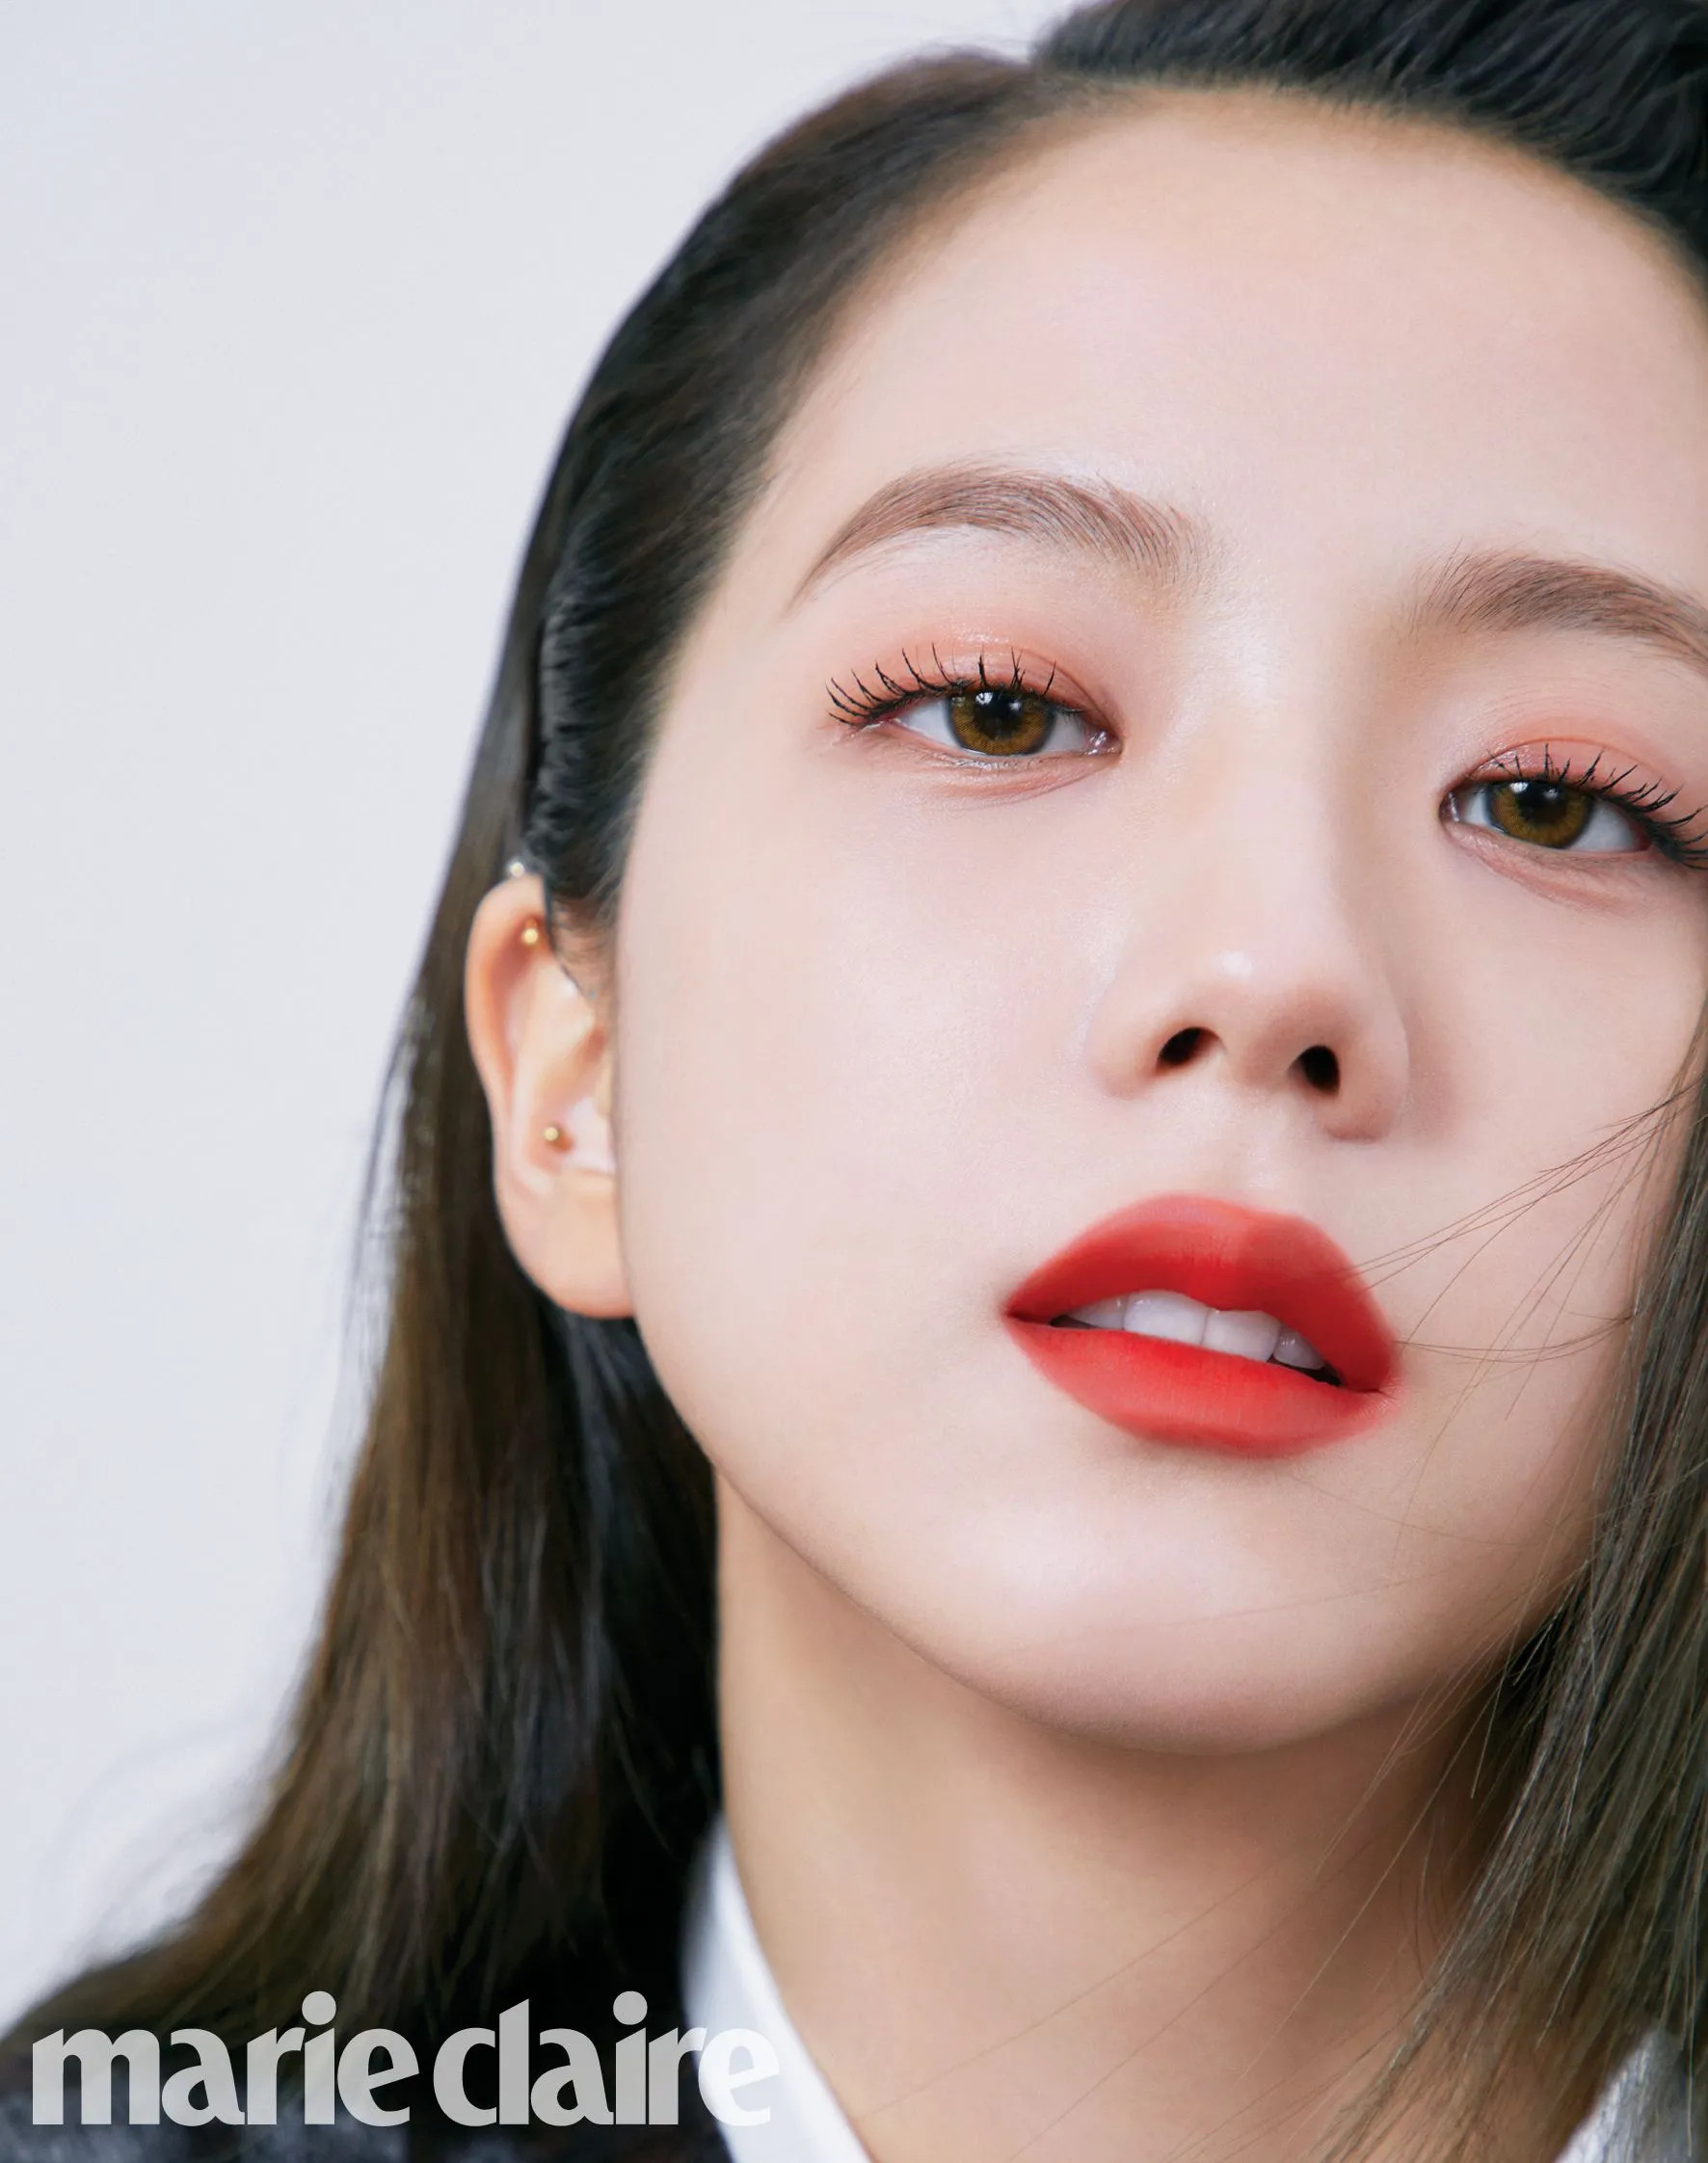 BLACKPINK's Jisoo for Marie Claire Korea Magazine September 2020 Issue ...